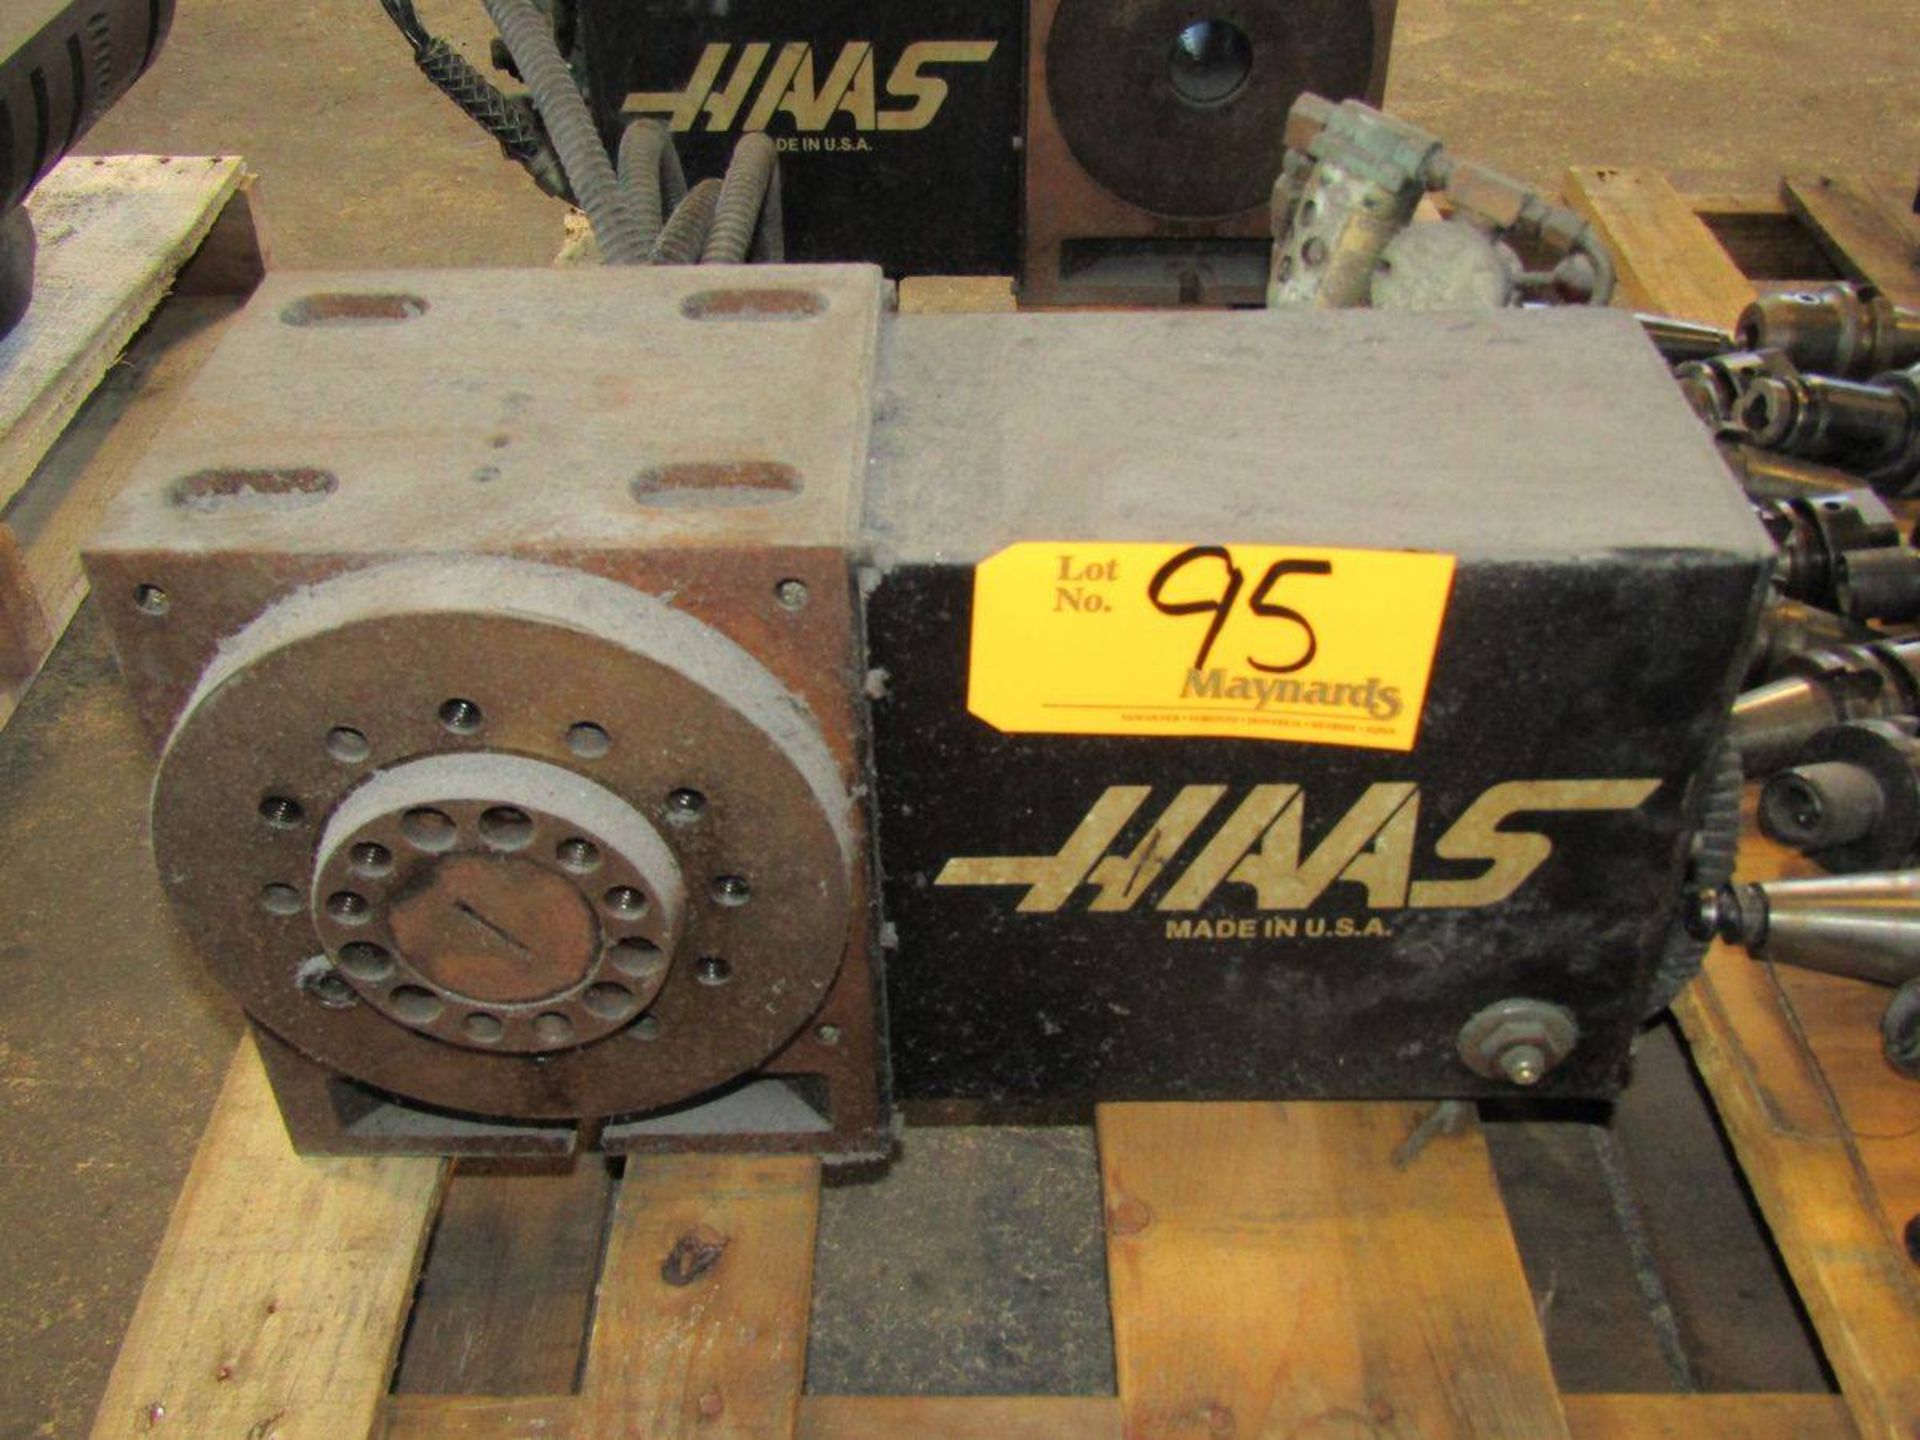 Haas 4th-Axis Indexer